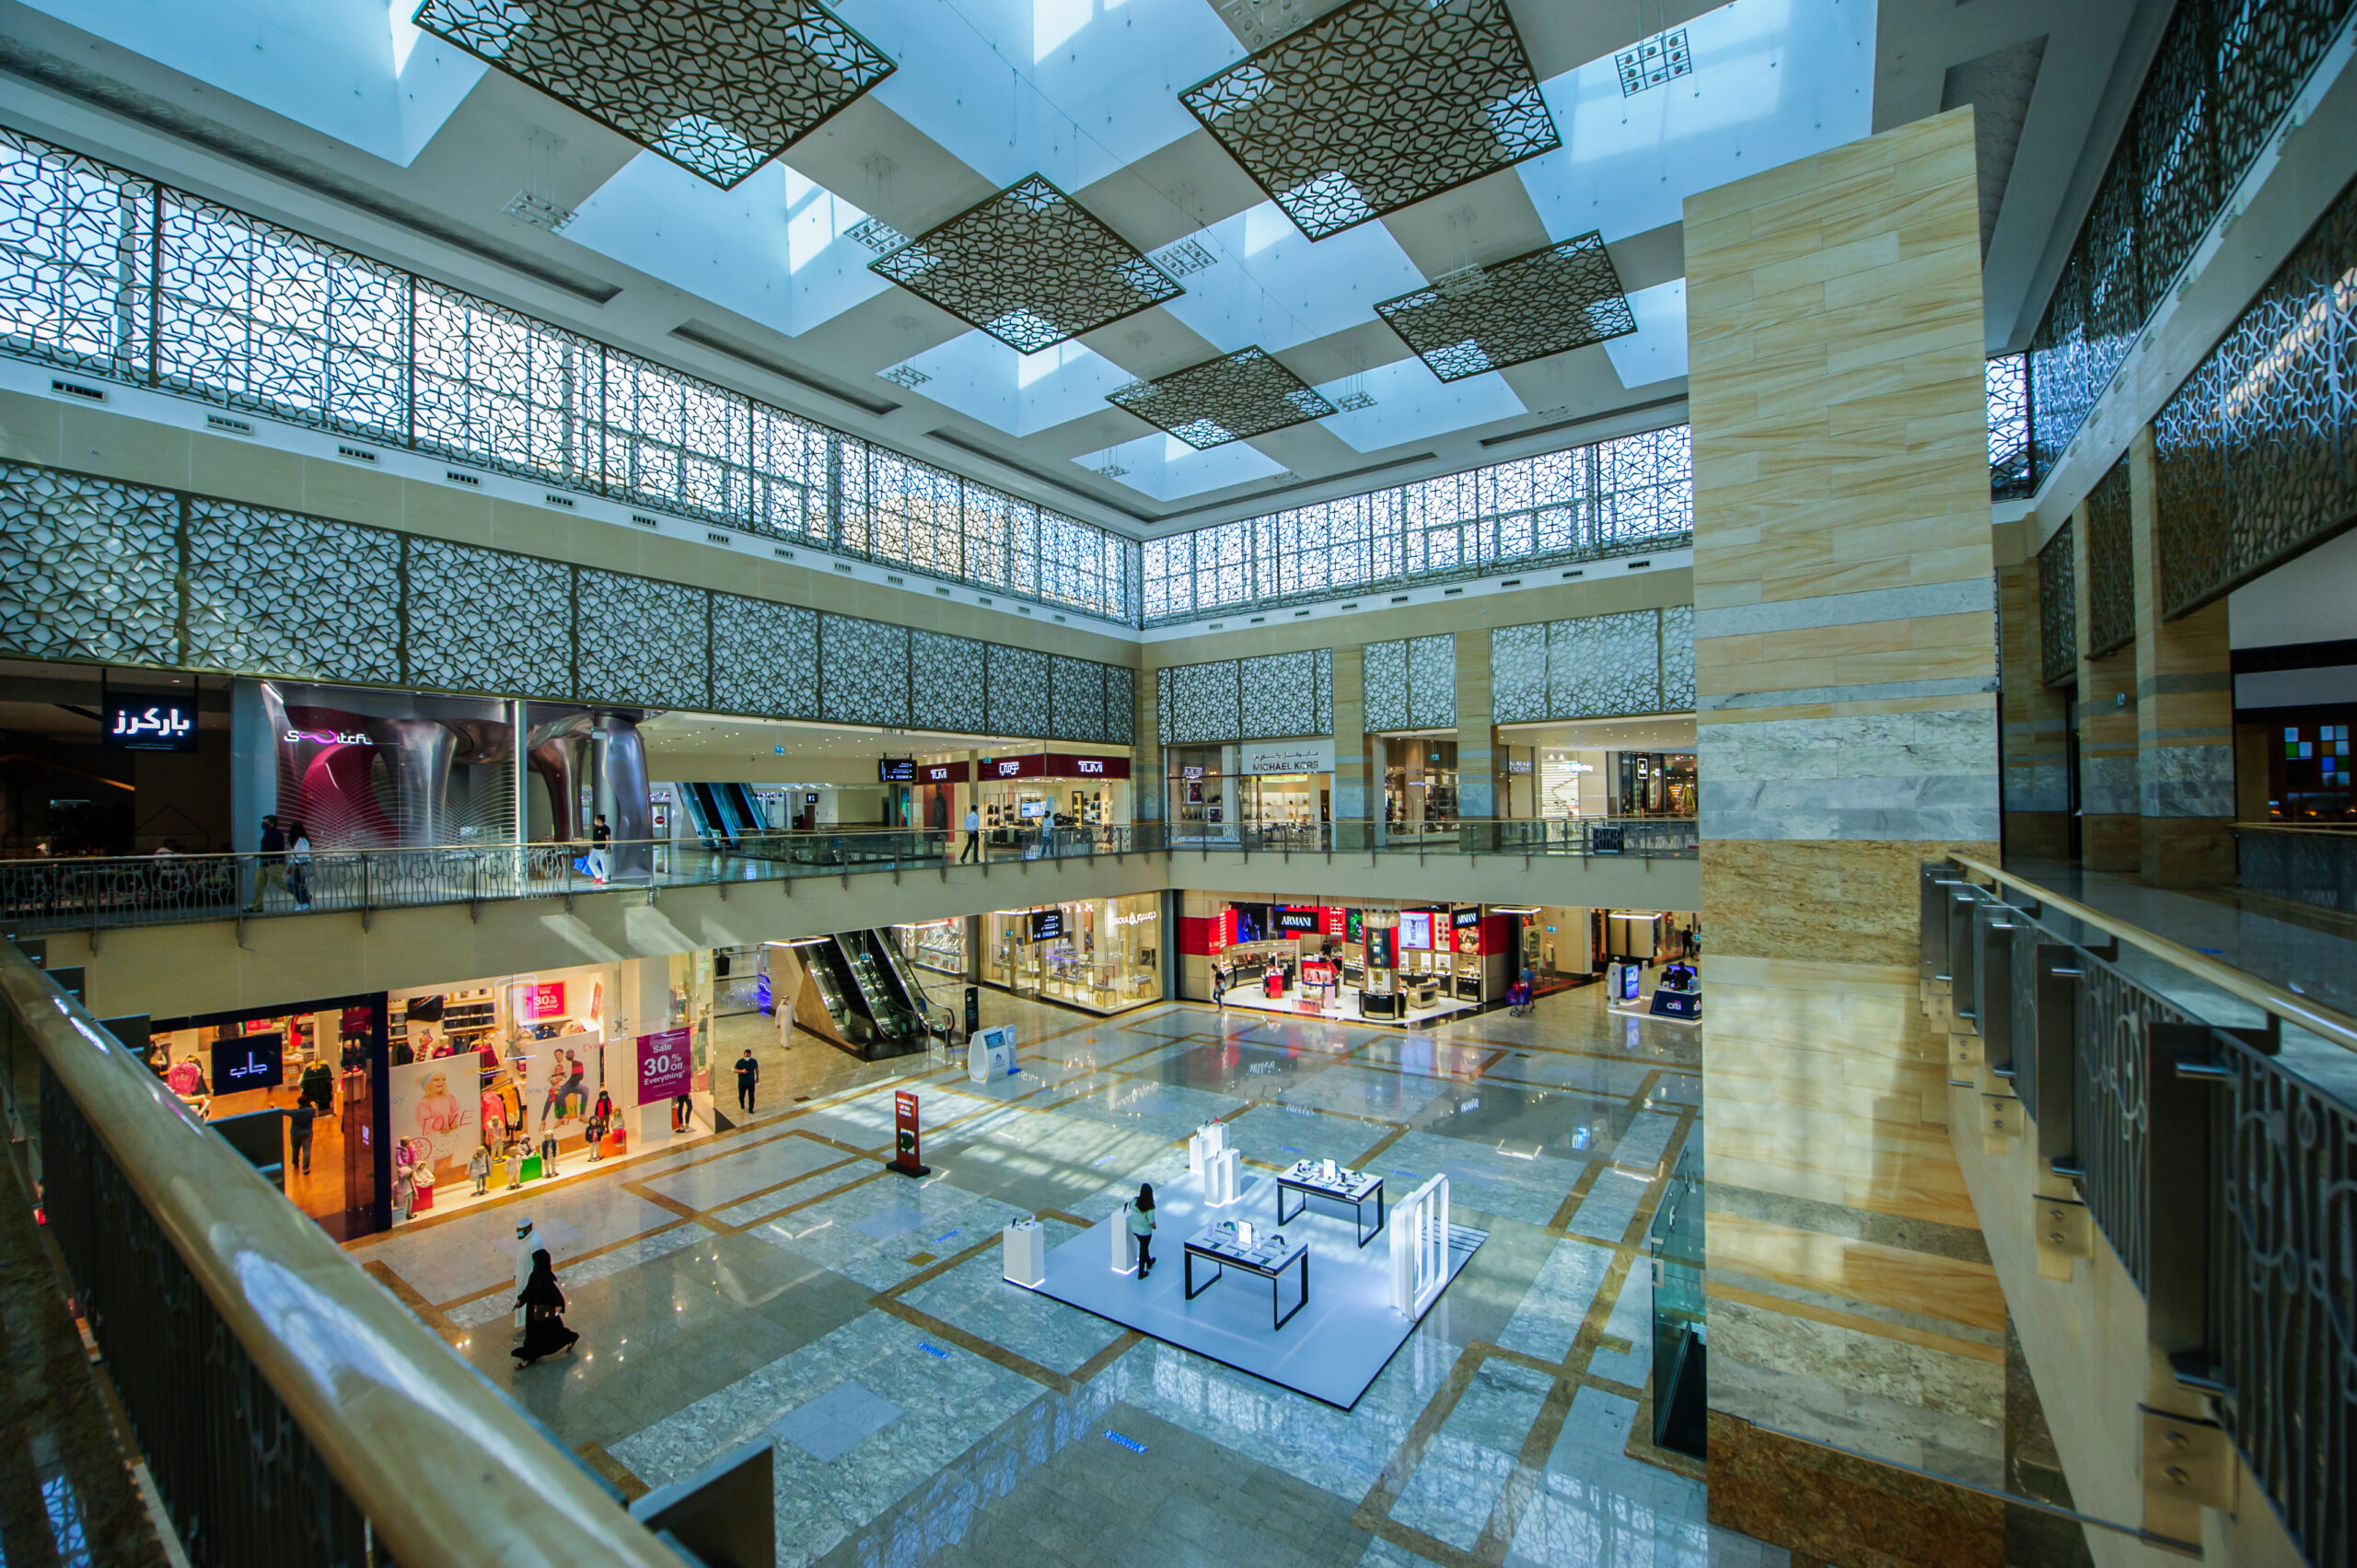 City Centre Mirdif in Dubai shopping mall has 400+ stores, food and entertainment facilities. The mall opened in 2010 and is run by Majid Al Futtaim Properties.